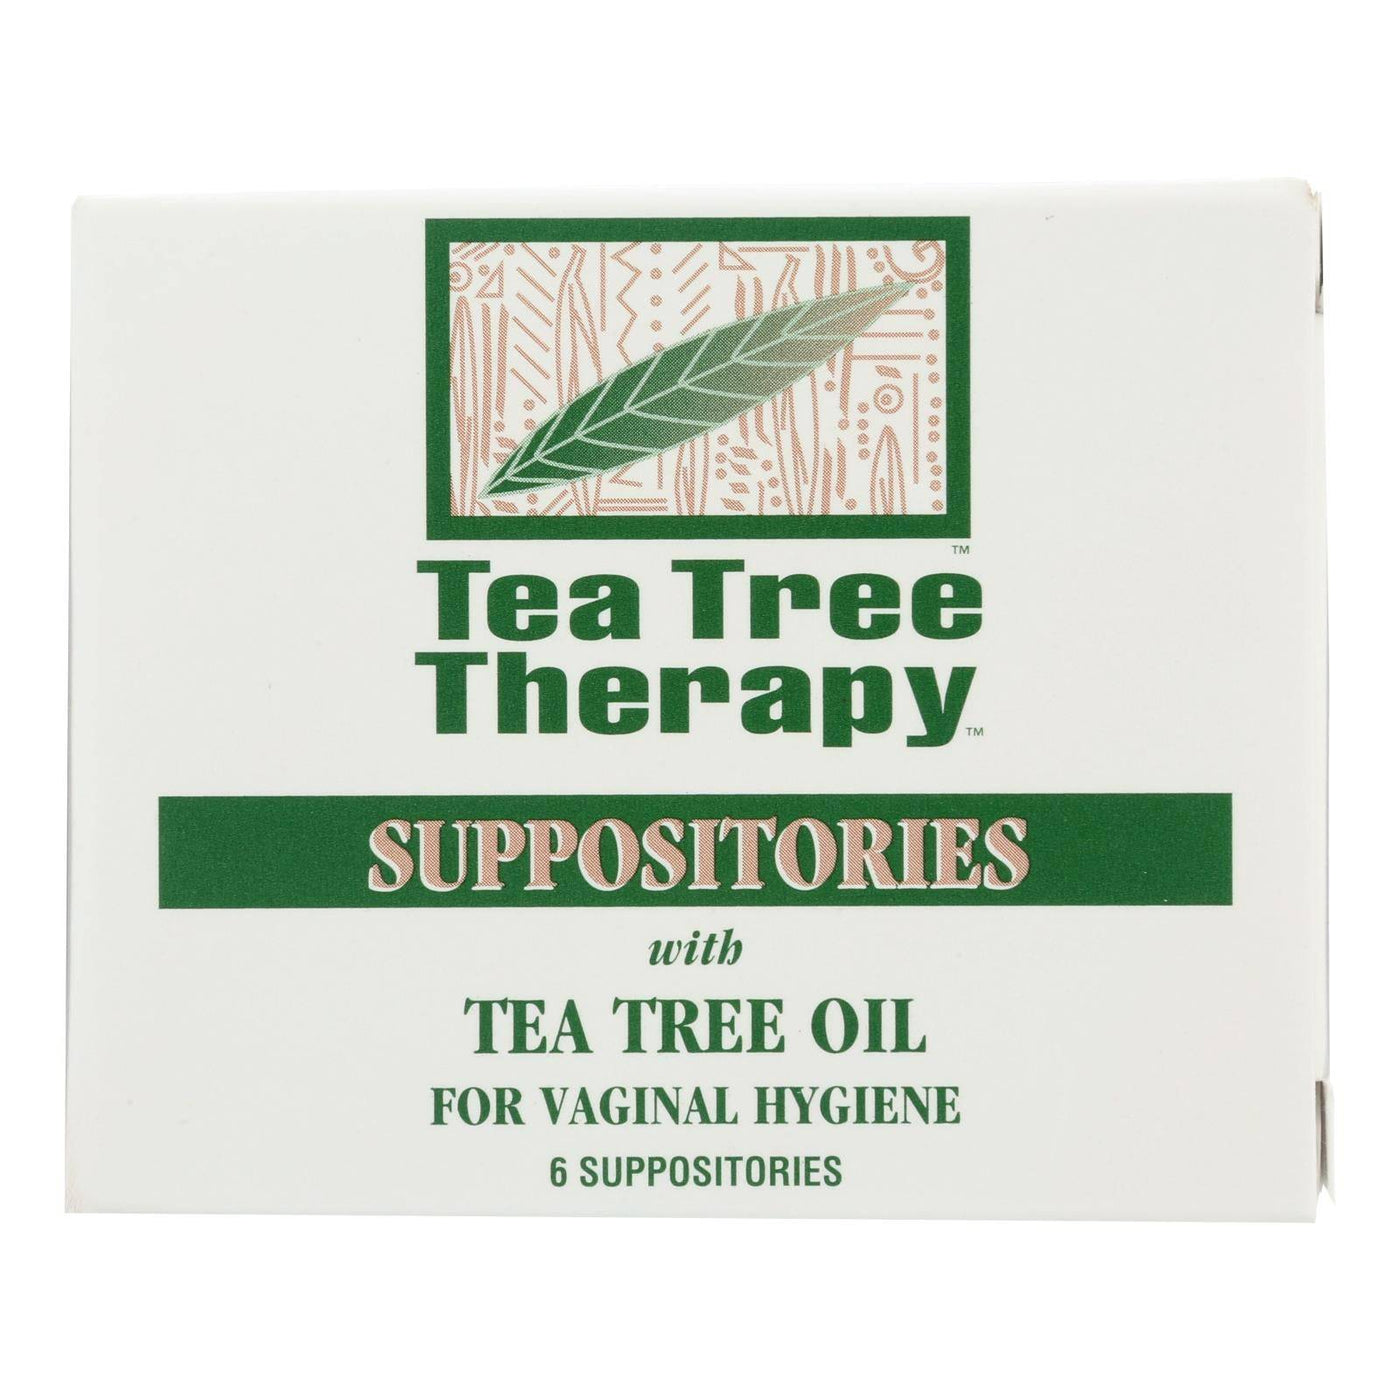 Tea Tree Therapy Vaginal Suppositories With Tea Tree Oil - 6 Suppositories | OnlyNaturals.us